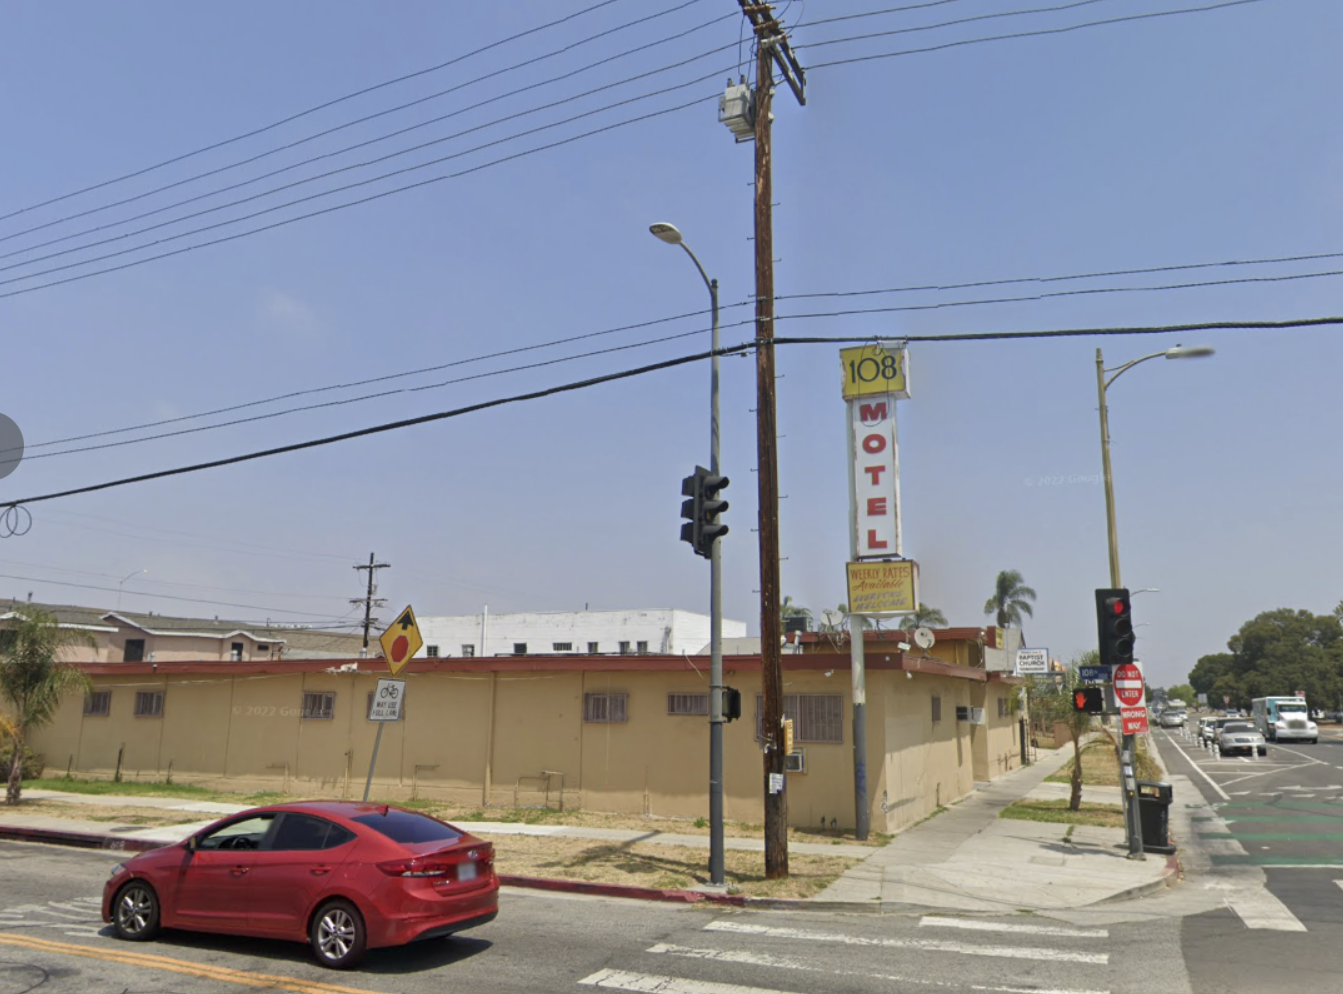 A Google maps screenshot of the 108 Motel in South L.A.